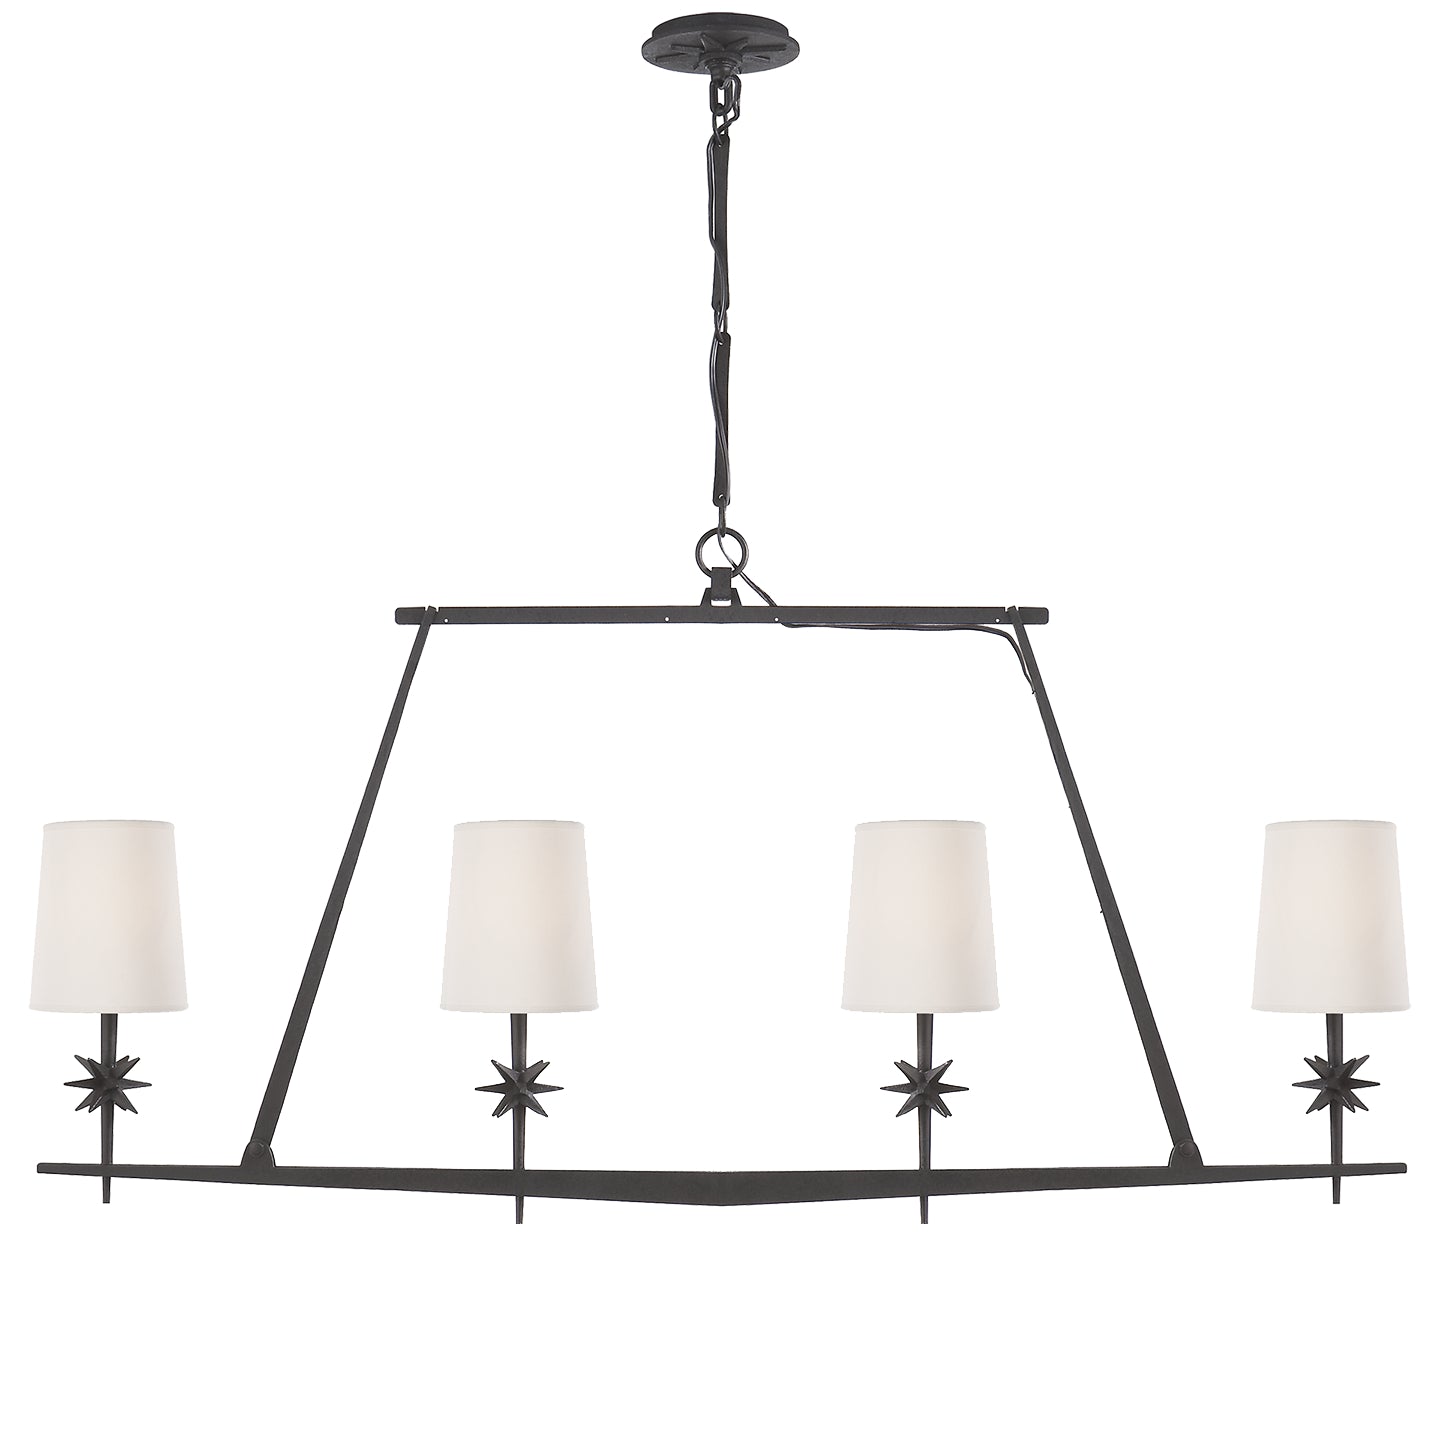 Visual Comfort Signature - S 5316BR-NP - Four Light Linear Chandelier - Etoile - Blackened Rust